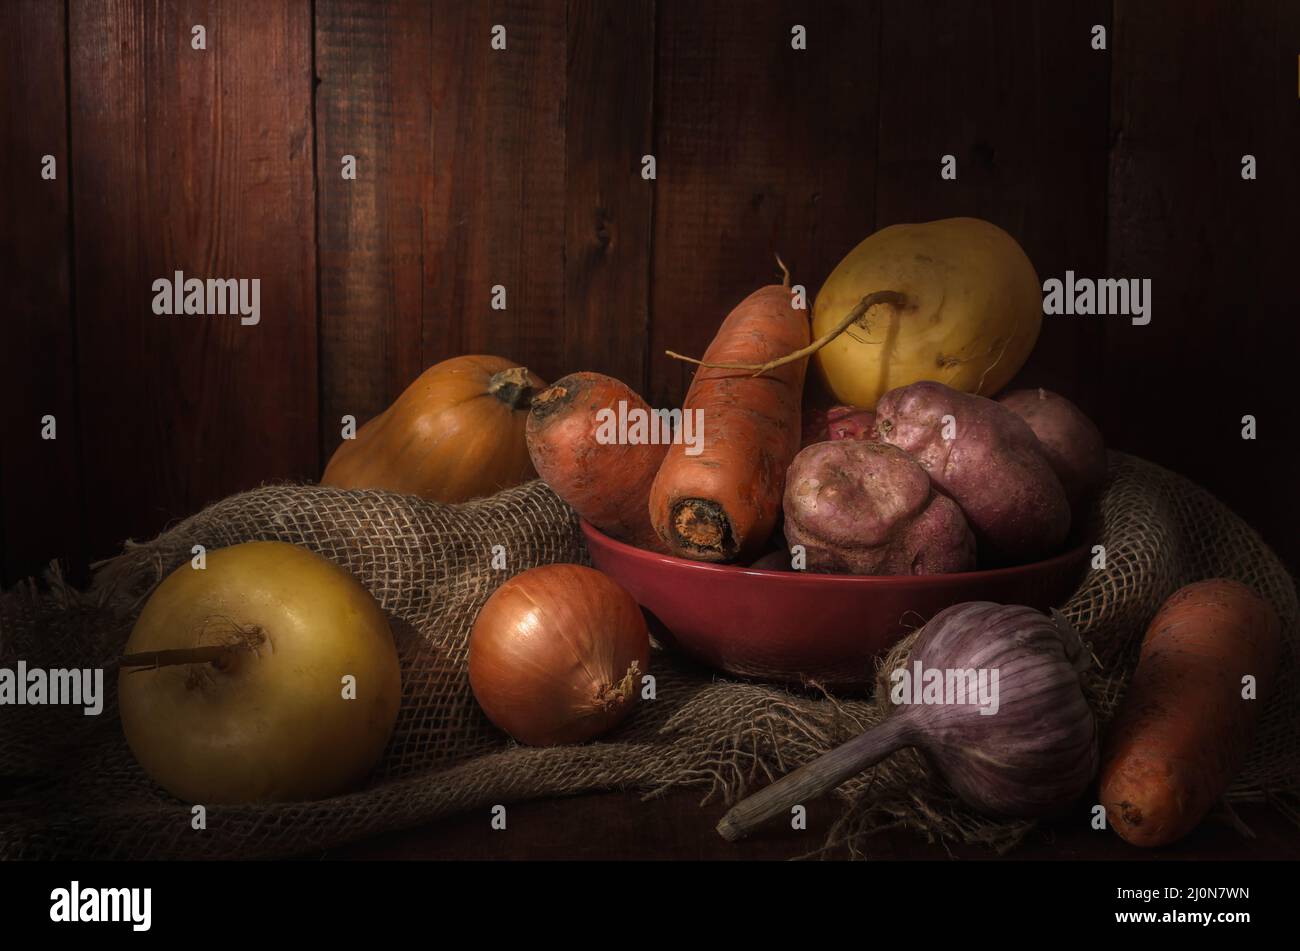 Vegetables in a clay bowl on a dark wooden background Stock Photo